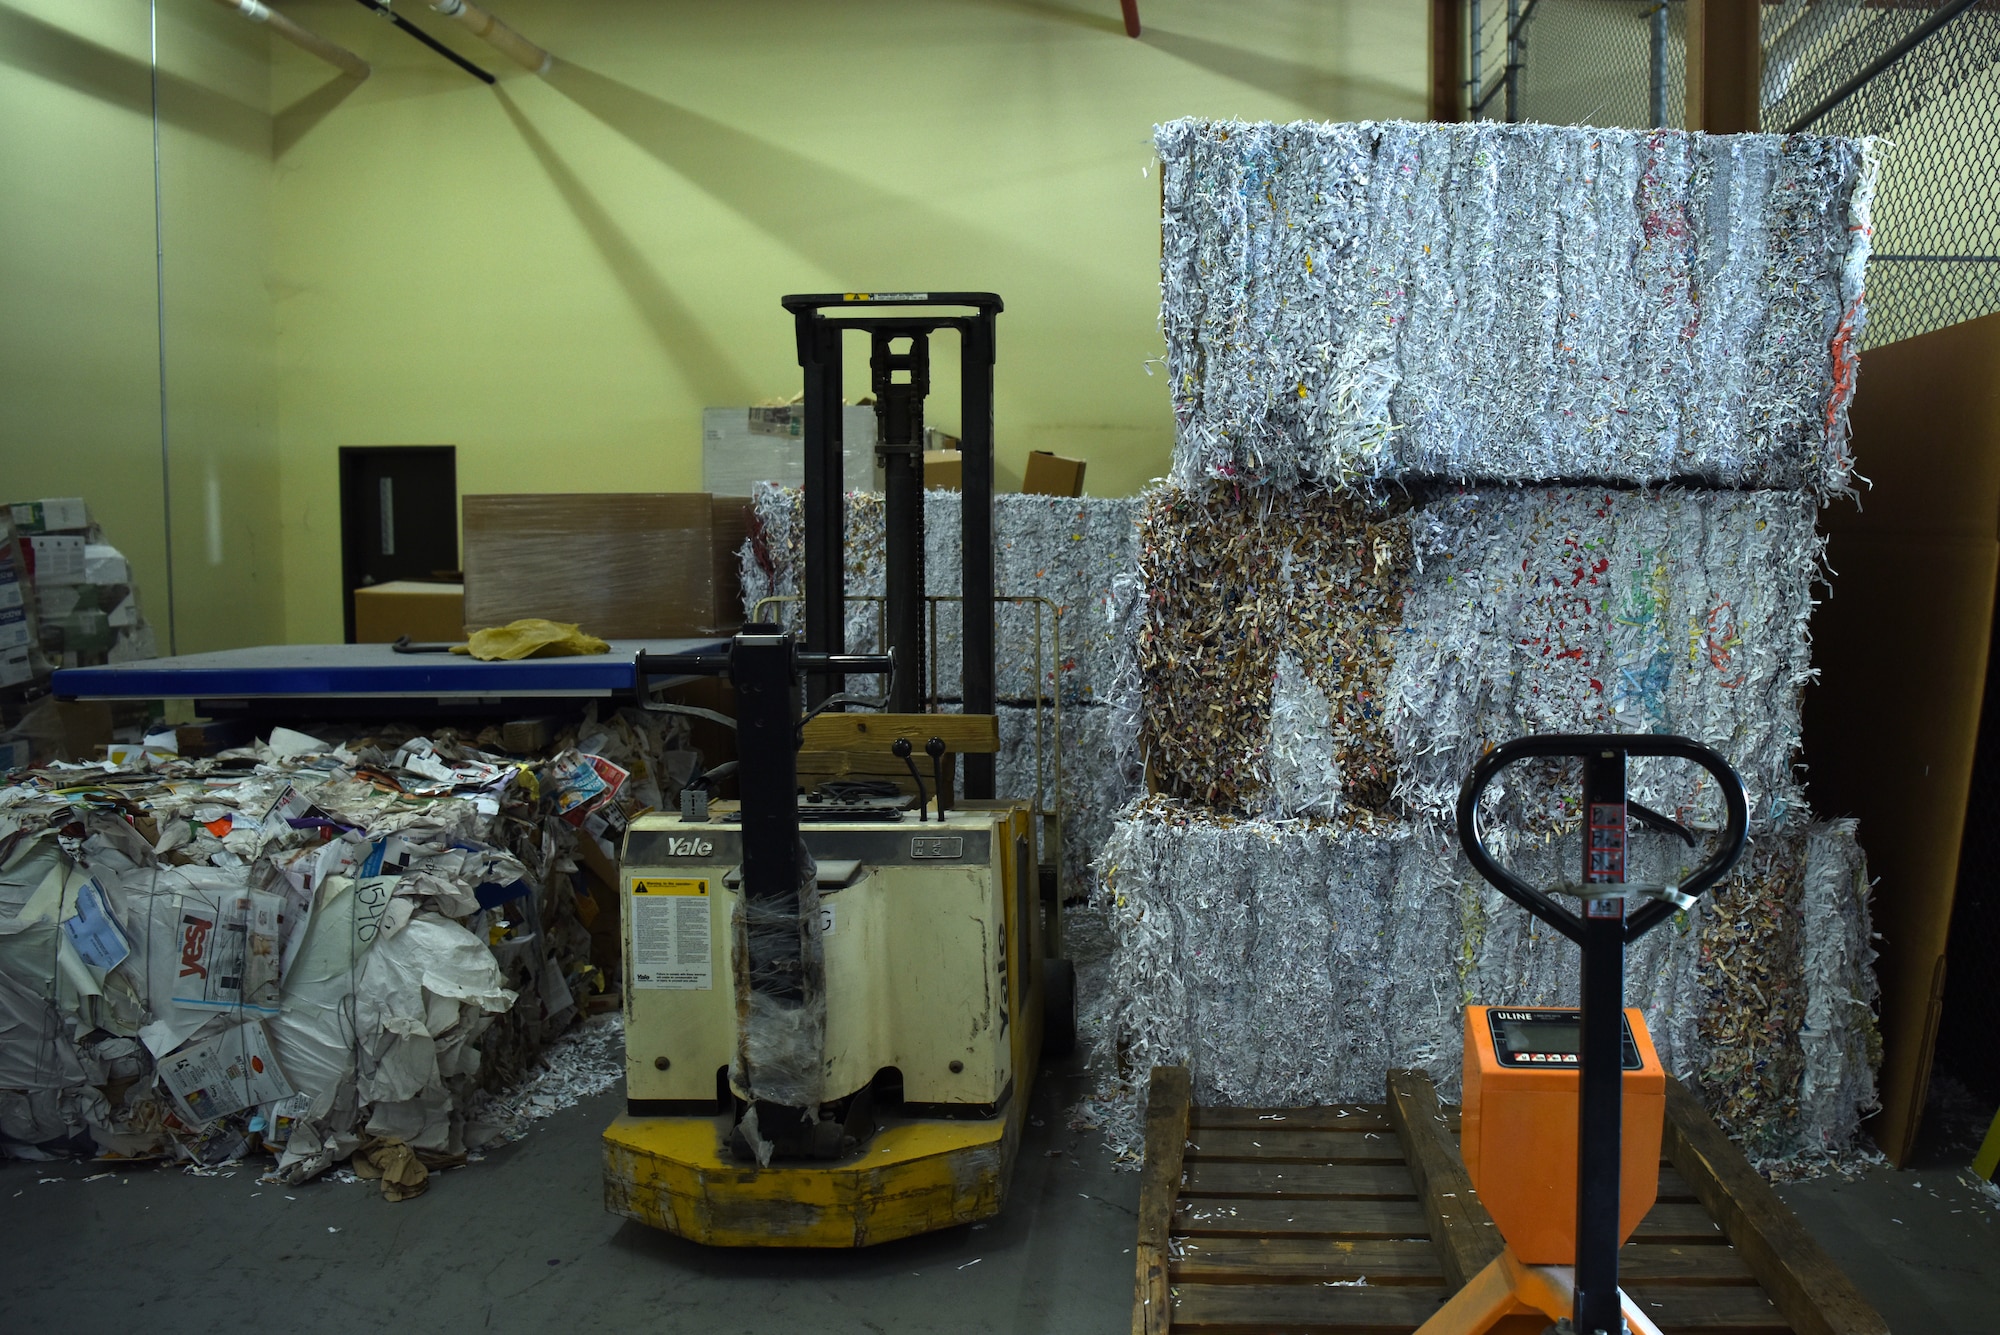 Recyclable materials are organized inside the Recycling Center on Keesler Air Force Base, Mississippi, July 30, 2019. The Qualified Recycling Program reduces the amount of waste going into the landfill and brings money to the base the more items are recycled. (U.S. Air Force photo by Senior Airman Suzie Plotnikov)